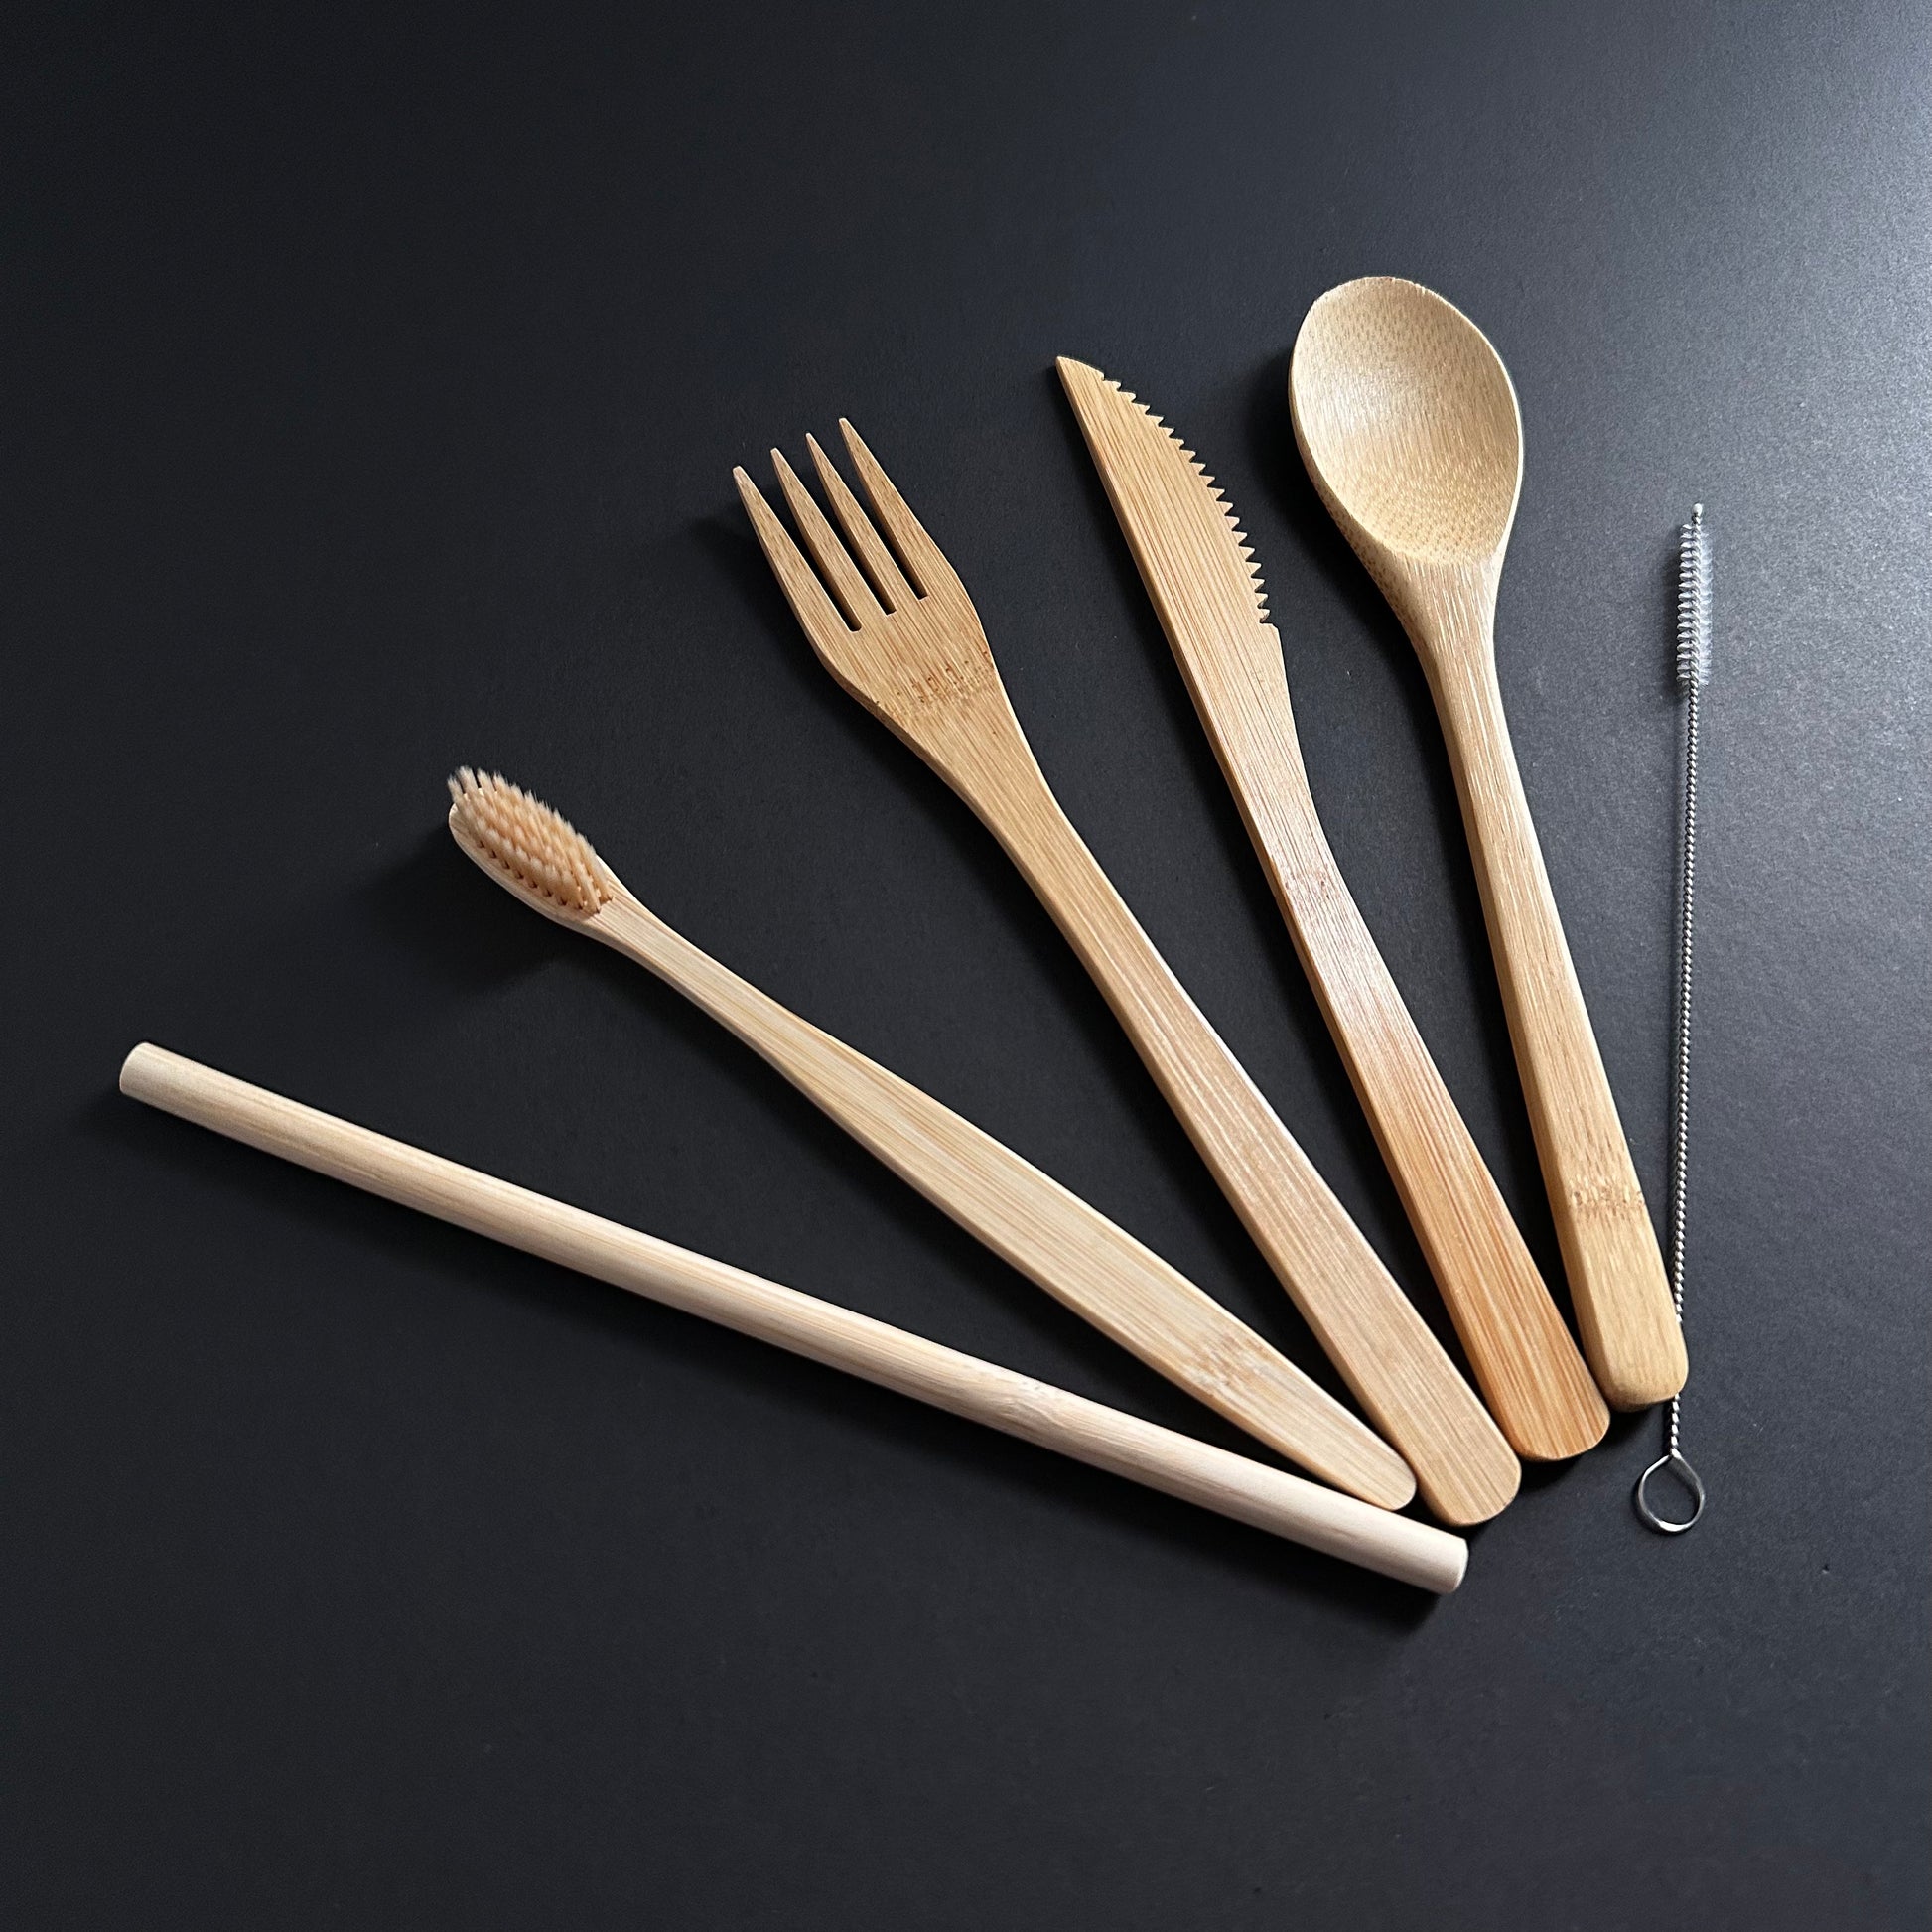 Bamboo Utensils Cutlery Set - 6 Knives, 6 Forks, 6 Spoons